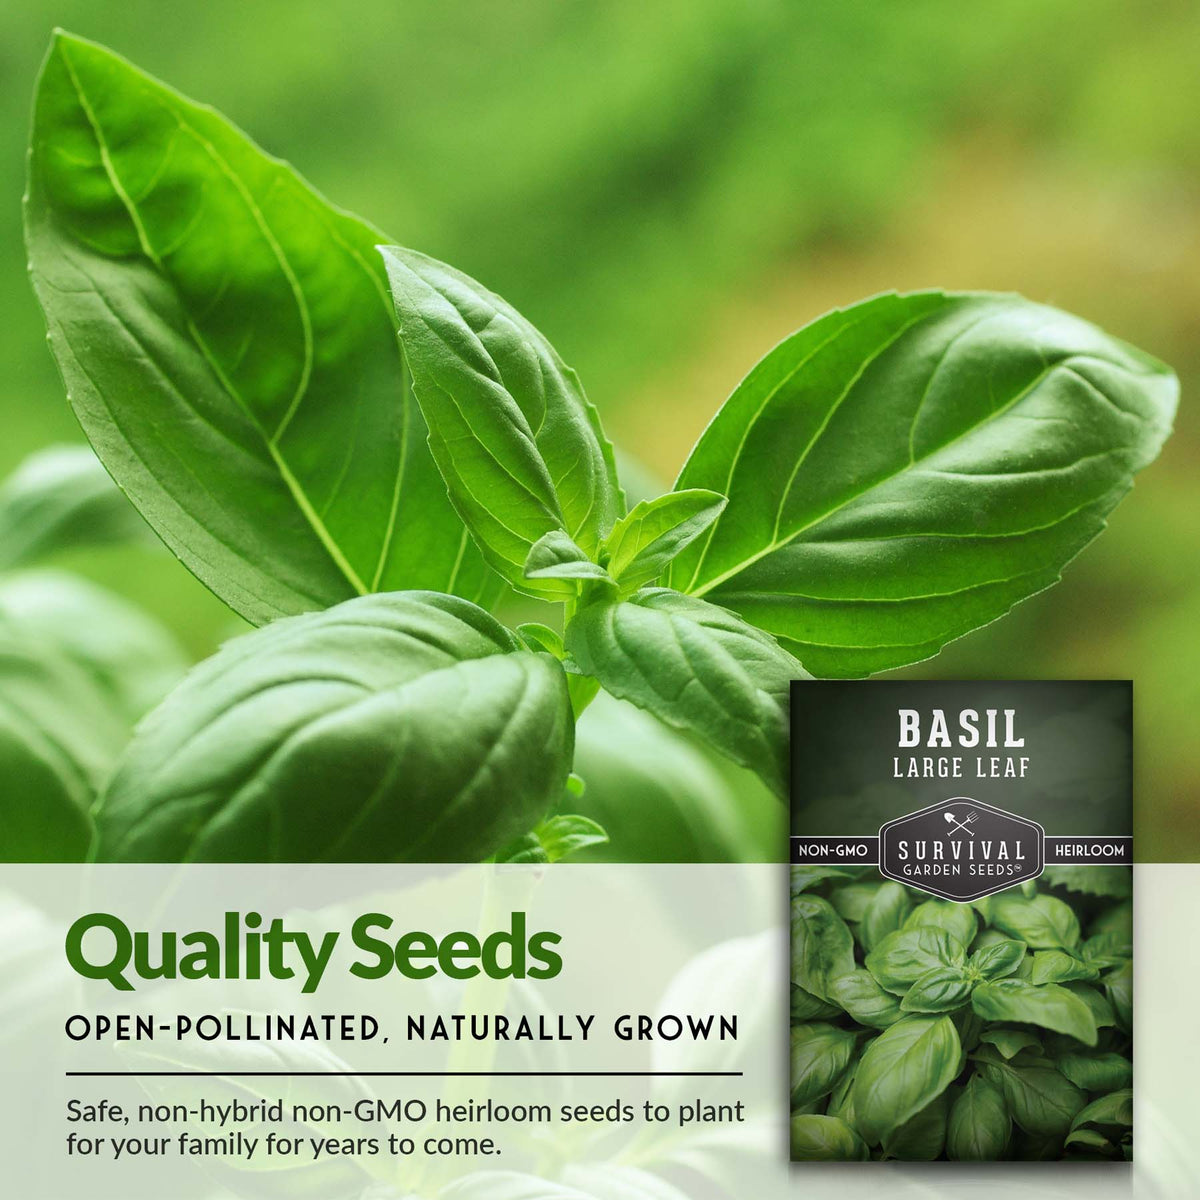 Open-pollinated quality Large Leaf basil seeds